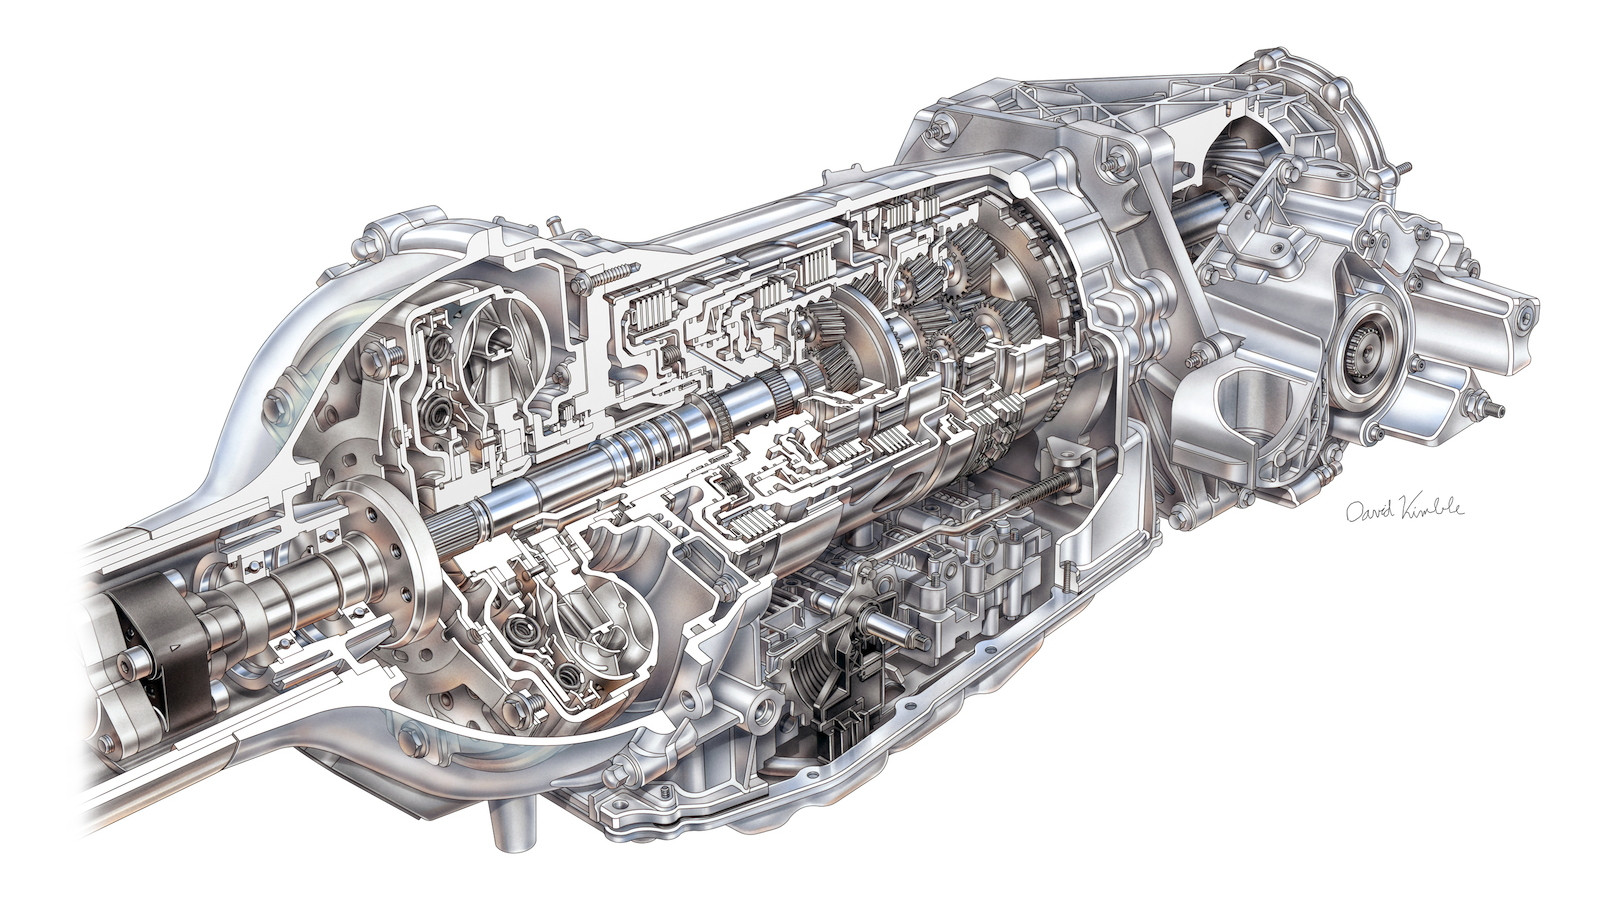 GM Hydra-Matic 8L90 8-speed automatic transmission for the Corvette Stingray and Z06